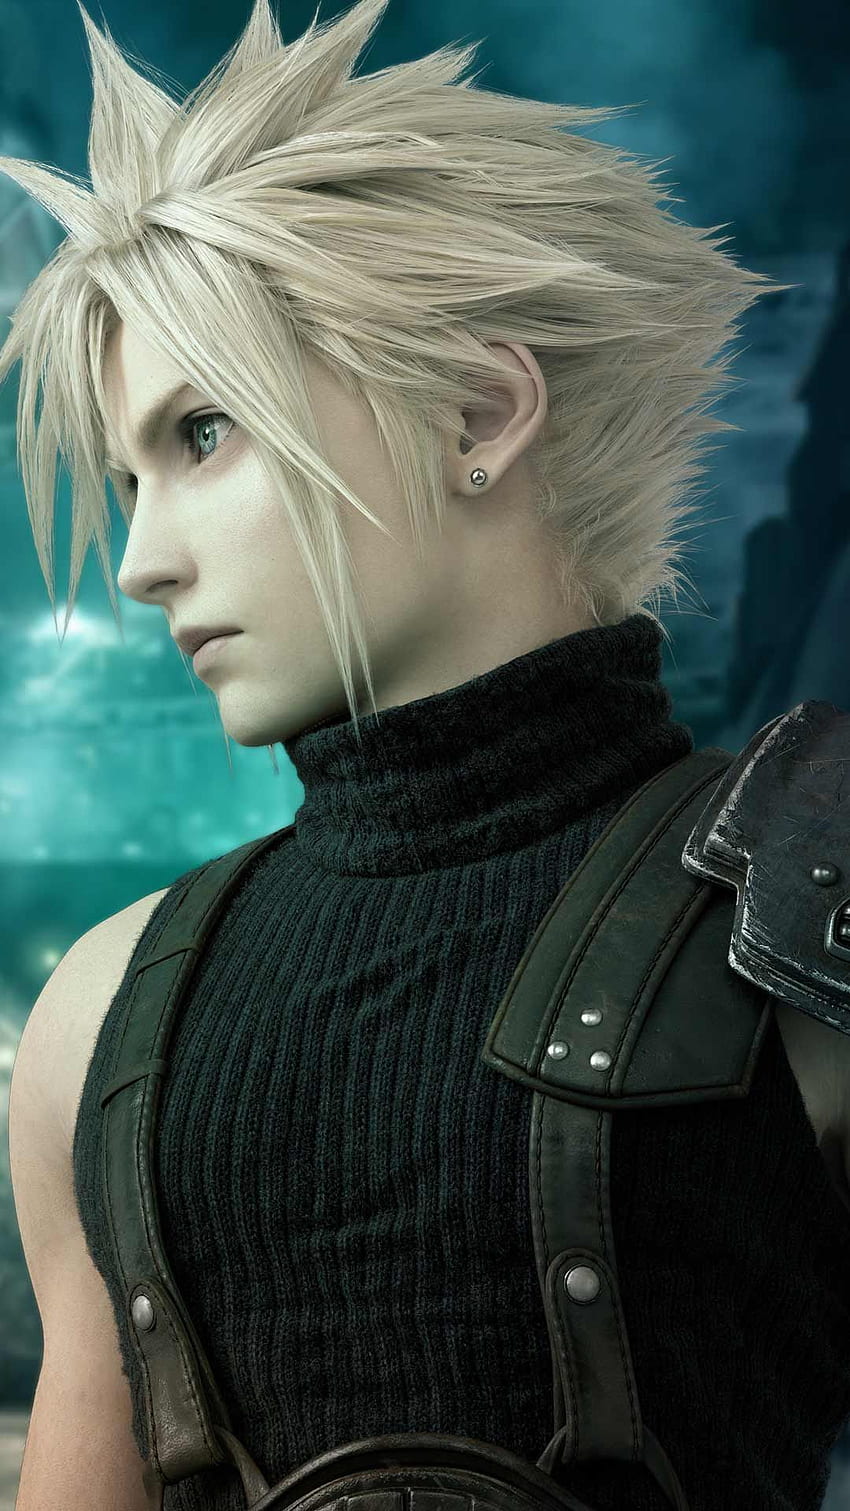 Final Fantasy 7 Remake phone background PS4 game art poster logo on iPhone andro in 2020. Final fantasy cloud strife, Final fantasy vii cloud, Final fantasy, Cloud FF7 Remake HD phone wallpaper